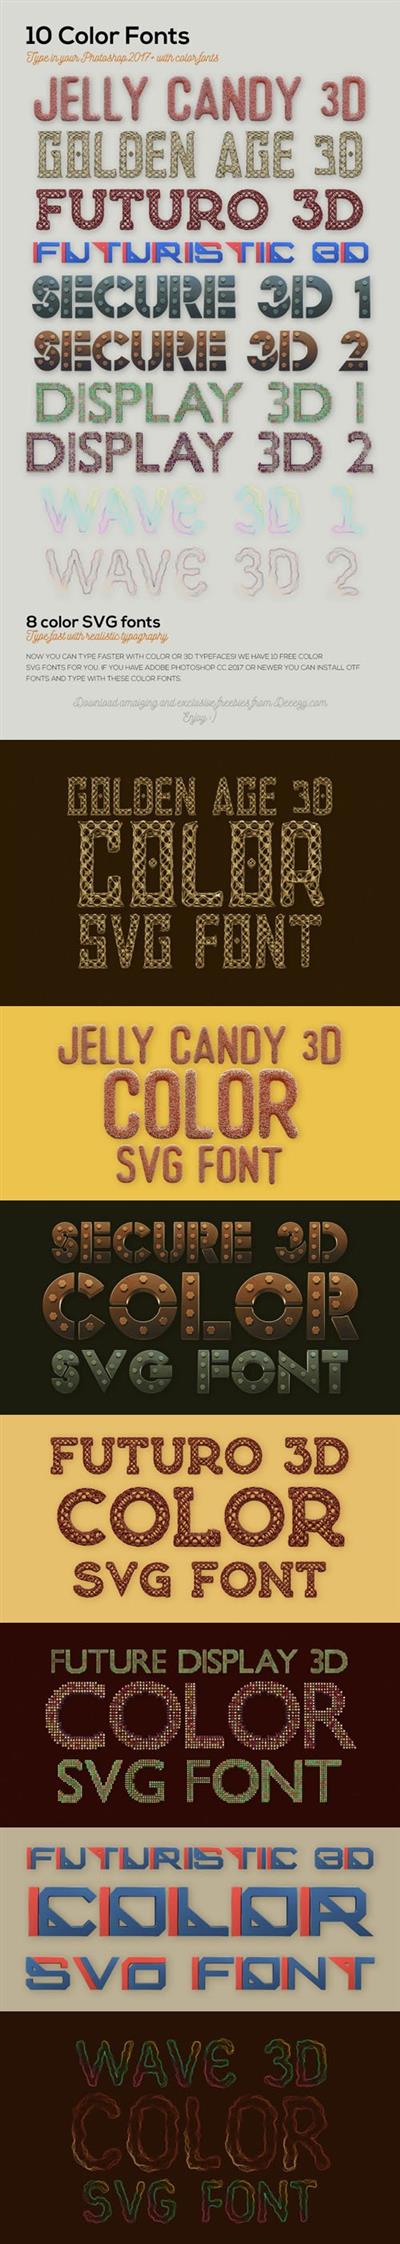 10 Color SVG Fonts for your Creative Projects